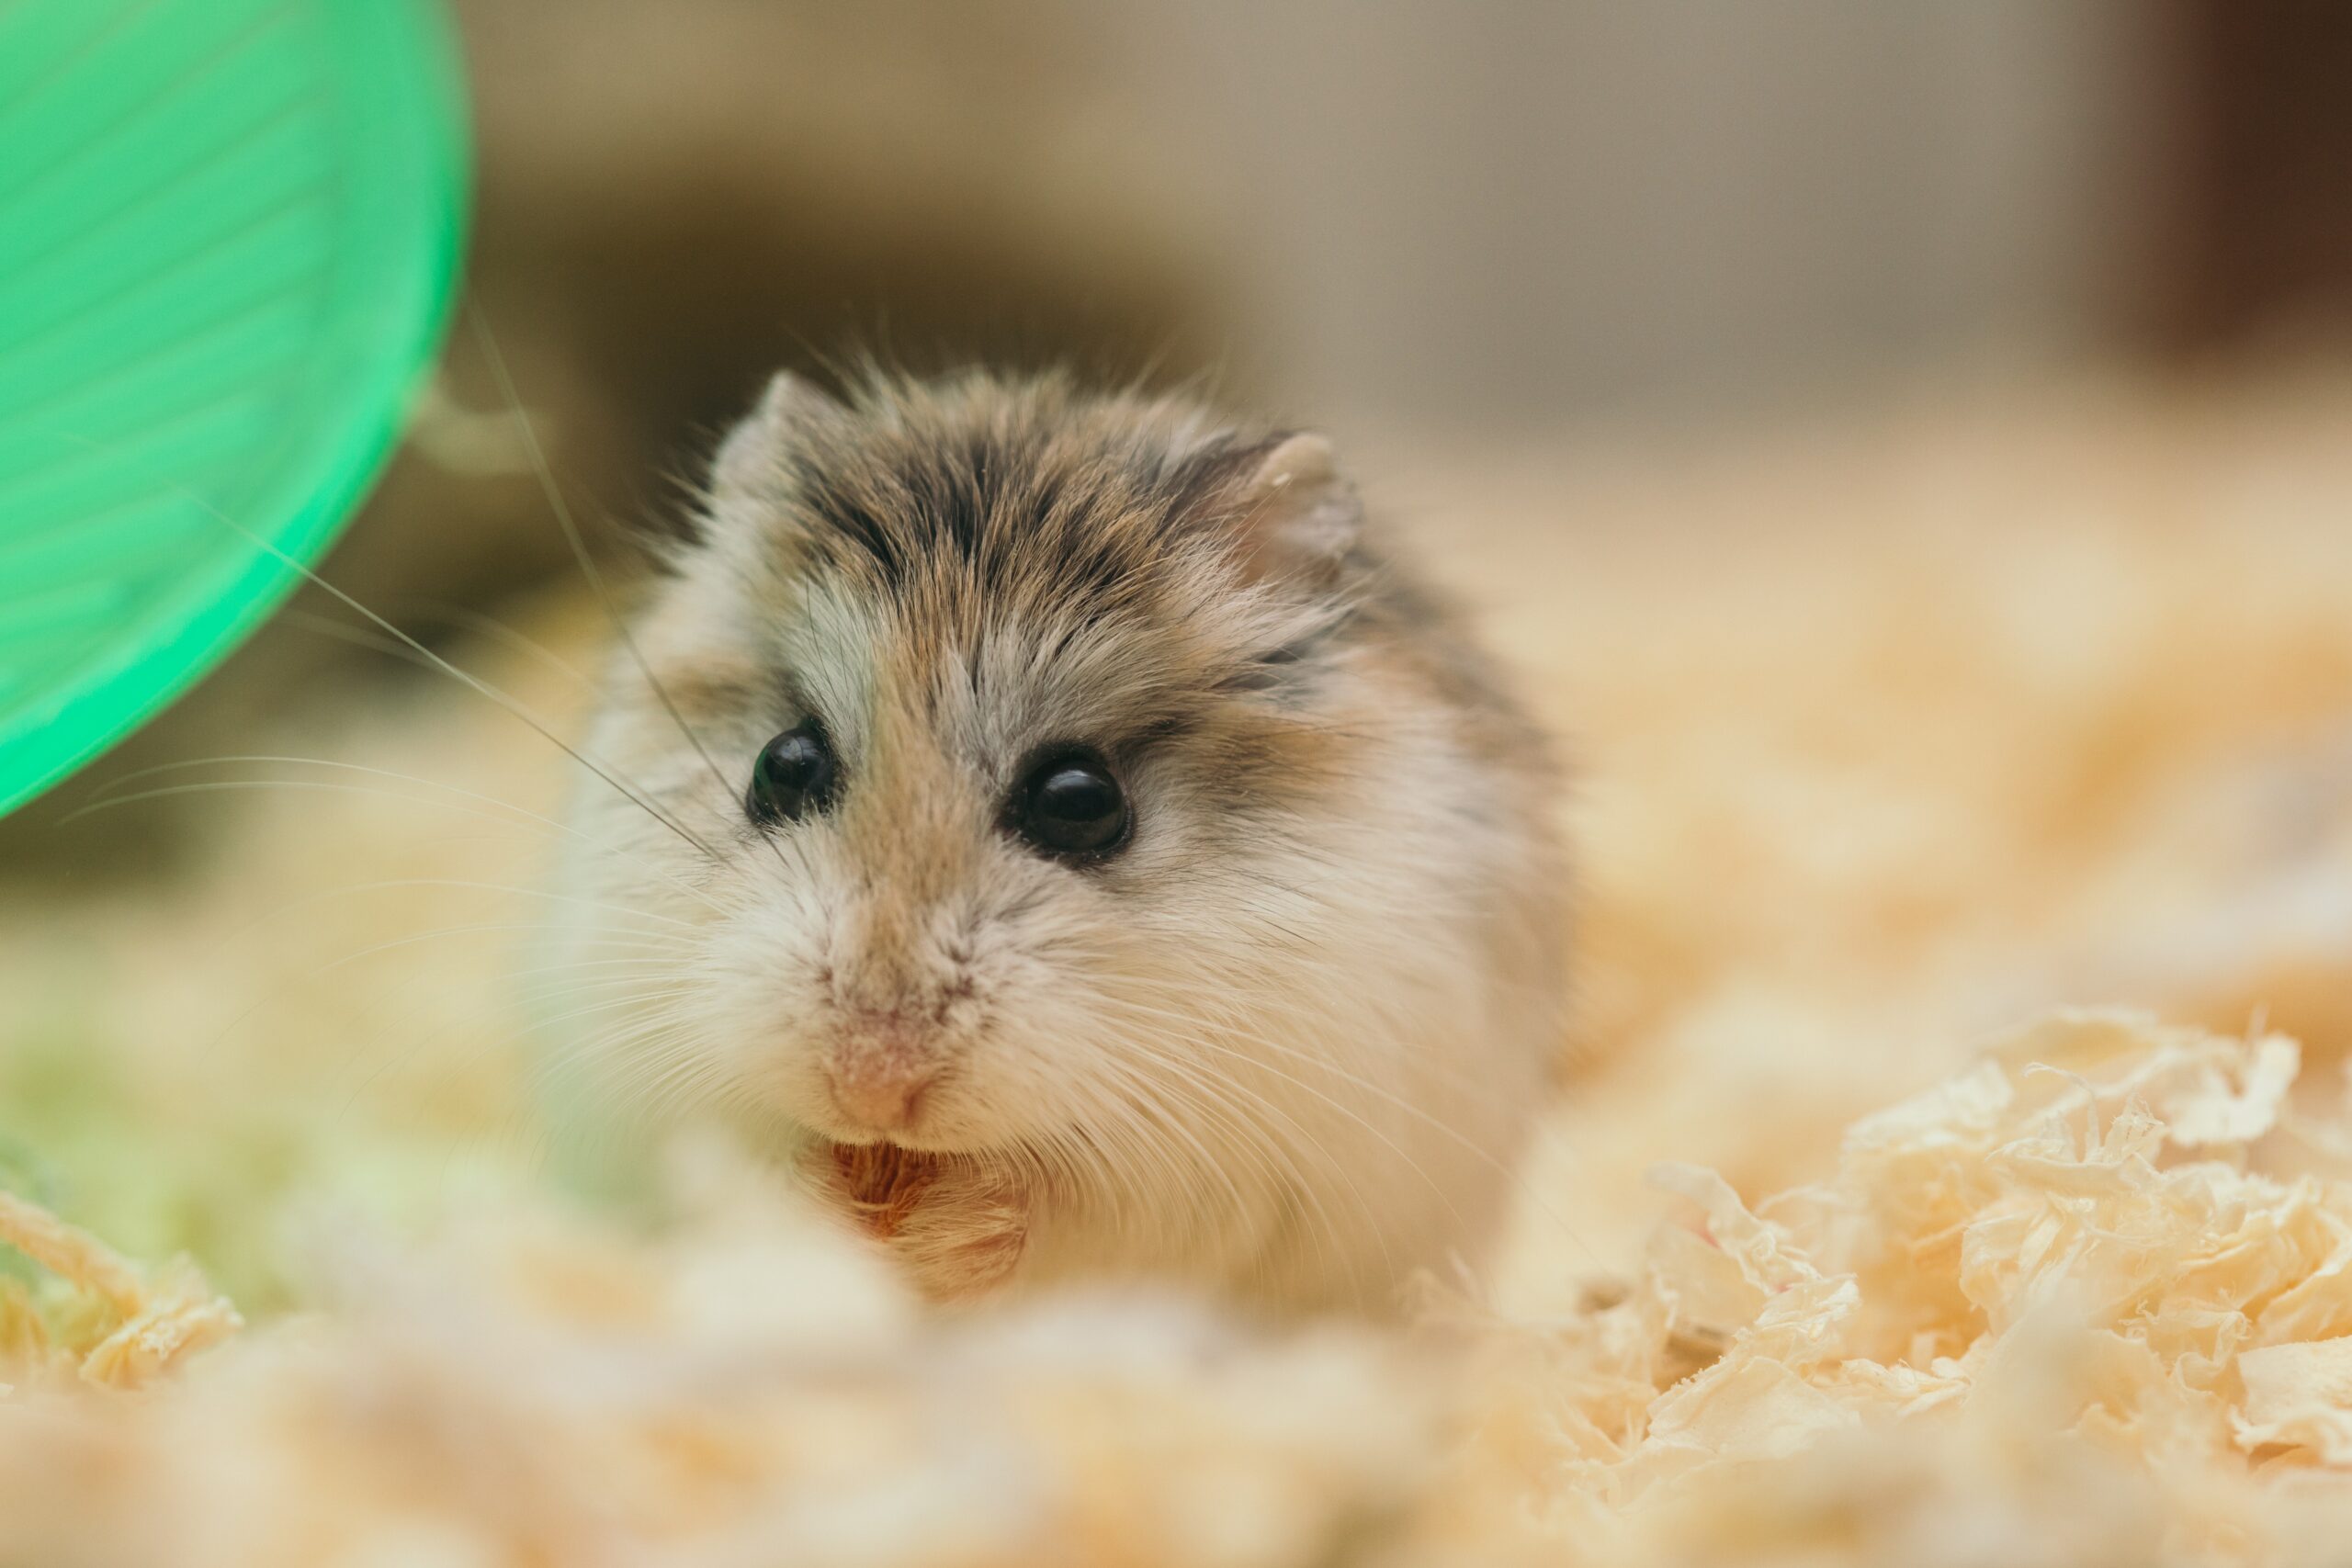 Do Hamsters Like Being in a Ball?